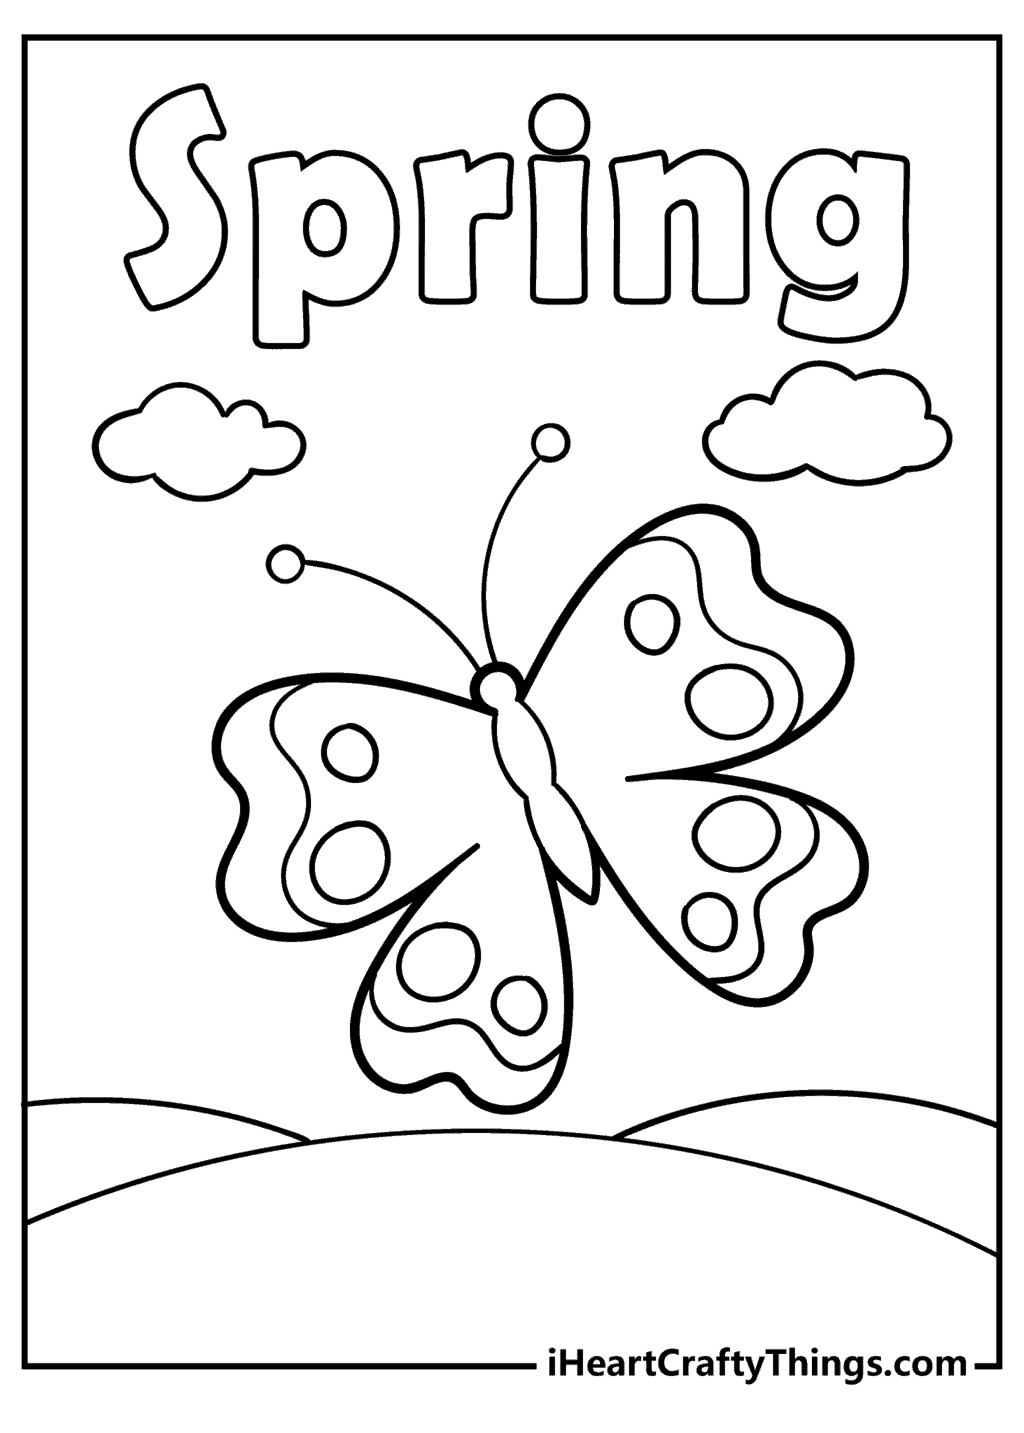 Free spring coloring pages updated in spring coloring pages spring coloring sheets preschool coloring pages